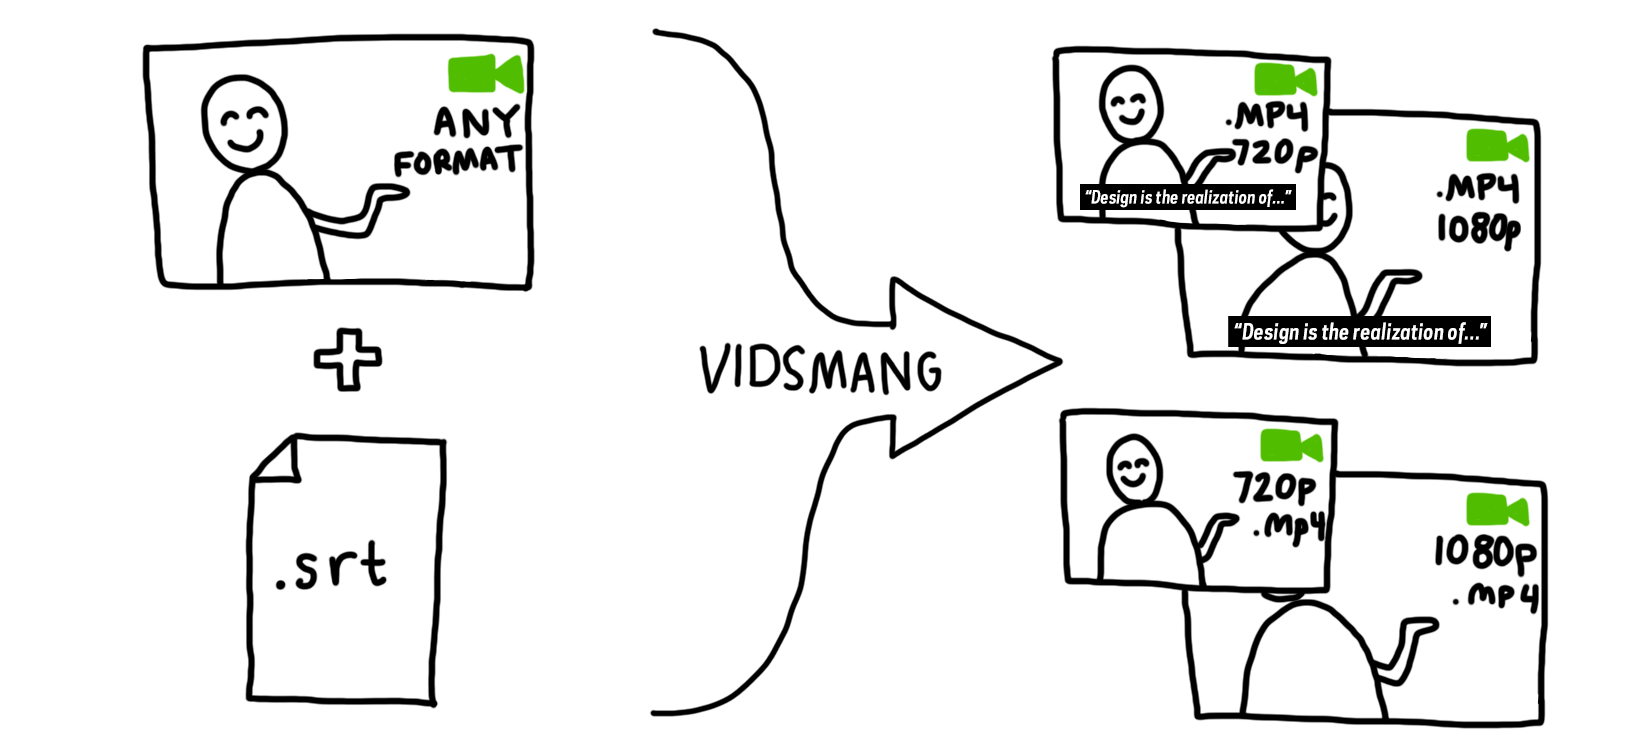 a flowchart showing two icons passing through an arrow that says "vidsmang" and resulting in four icons